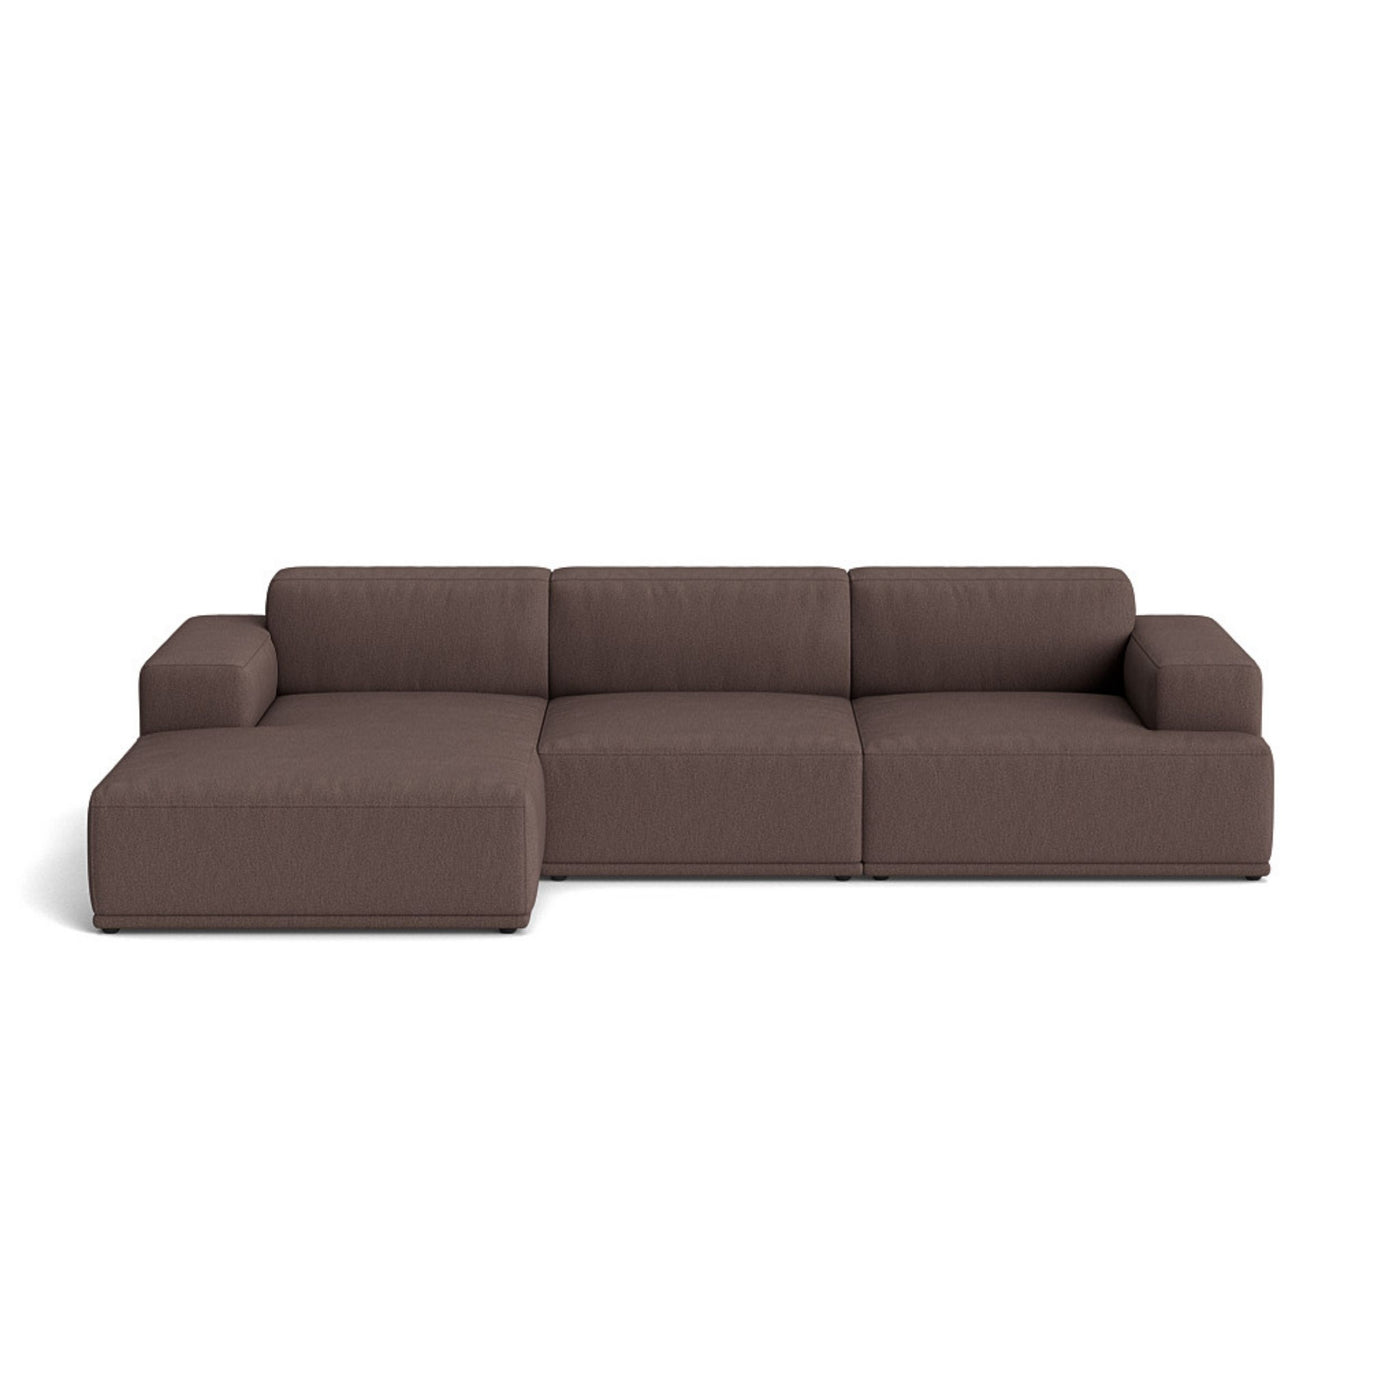 Muuto Connect Soft Modular 3 Seater Sofa, configuration 2. Made-to-order from someday designs. #colour_clay-6-red-brown